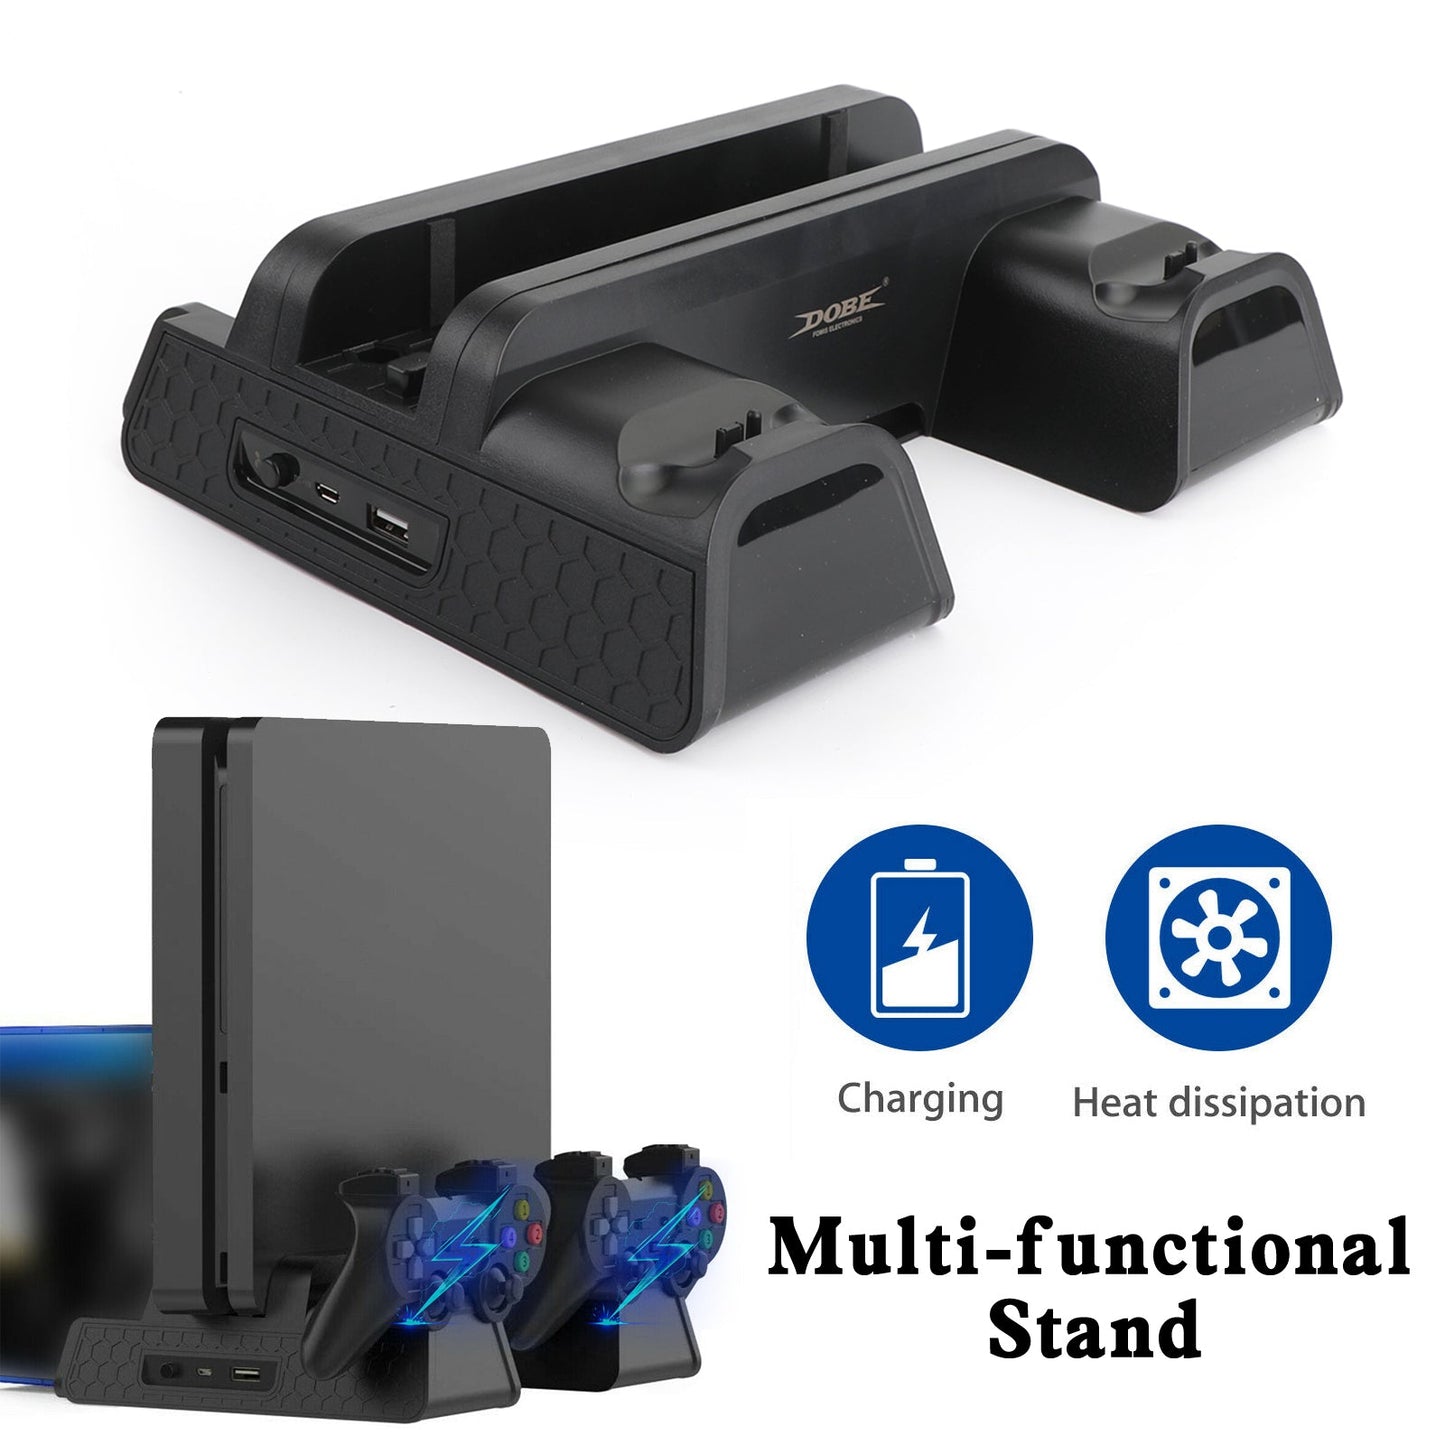 Vertical Stand + Cooling Fan Controller Charging Dock Fit For PS4 Pro/Slim